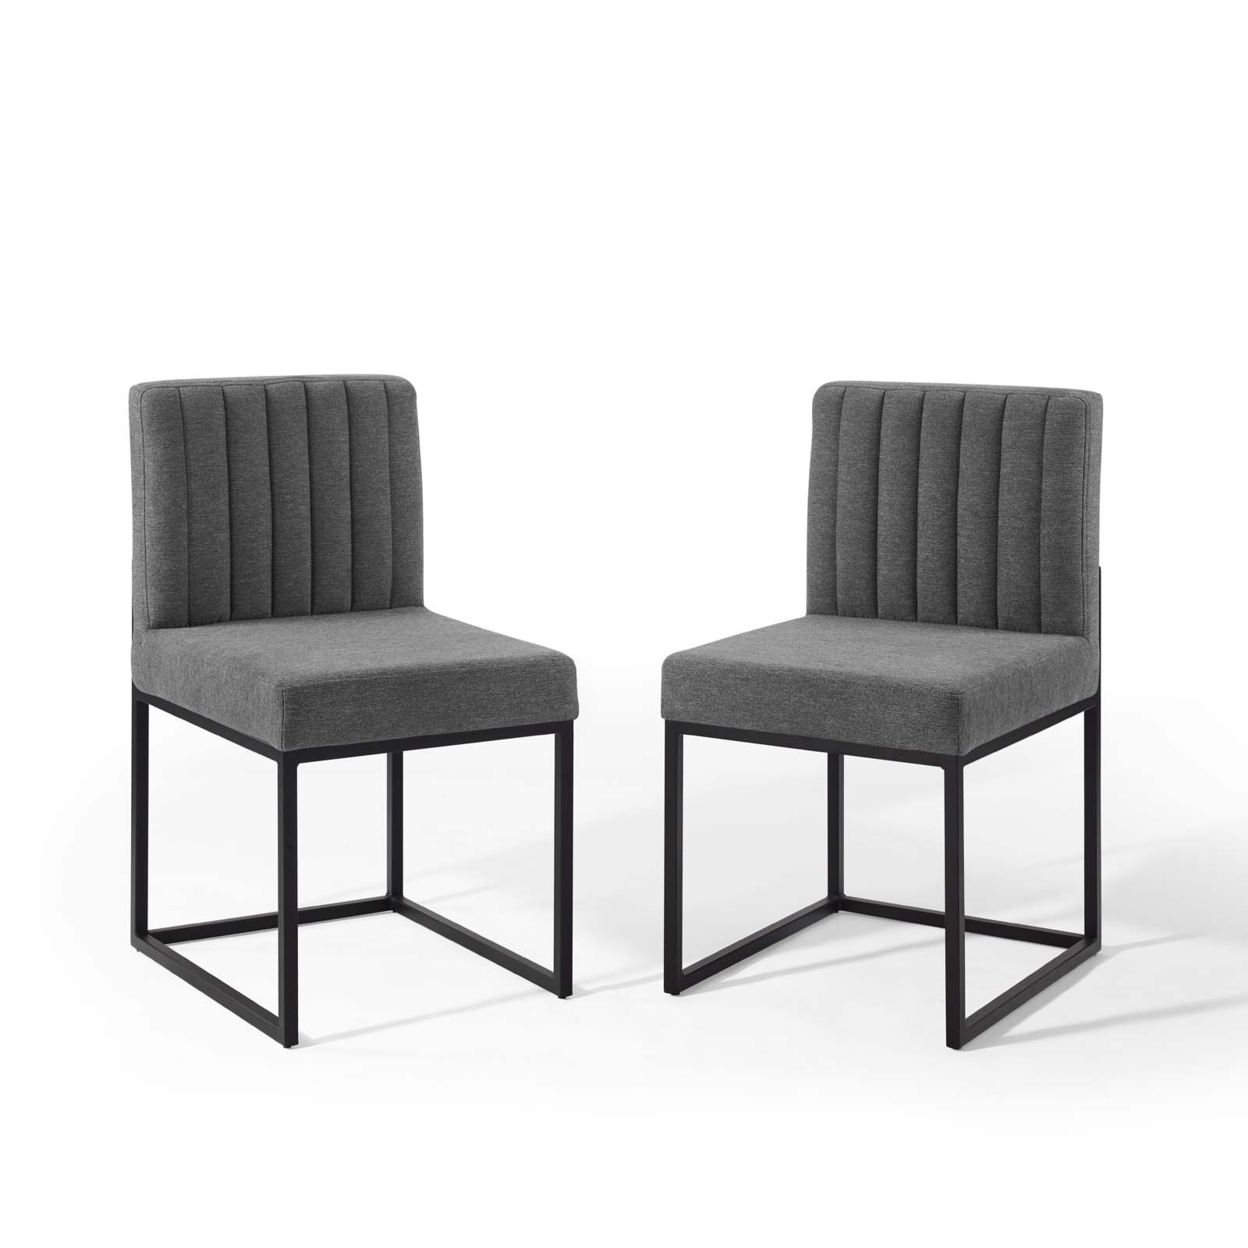 Carriage Dining Chair Upholstered Fabric Set Of 2, Black Charcoal